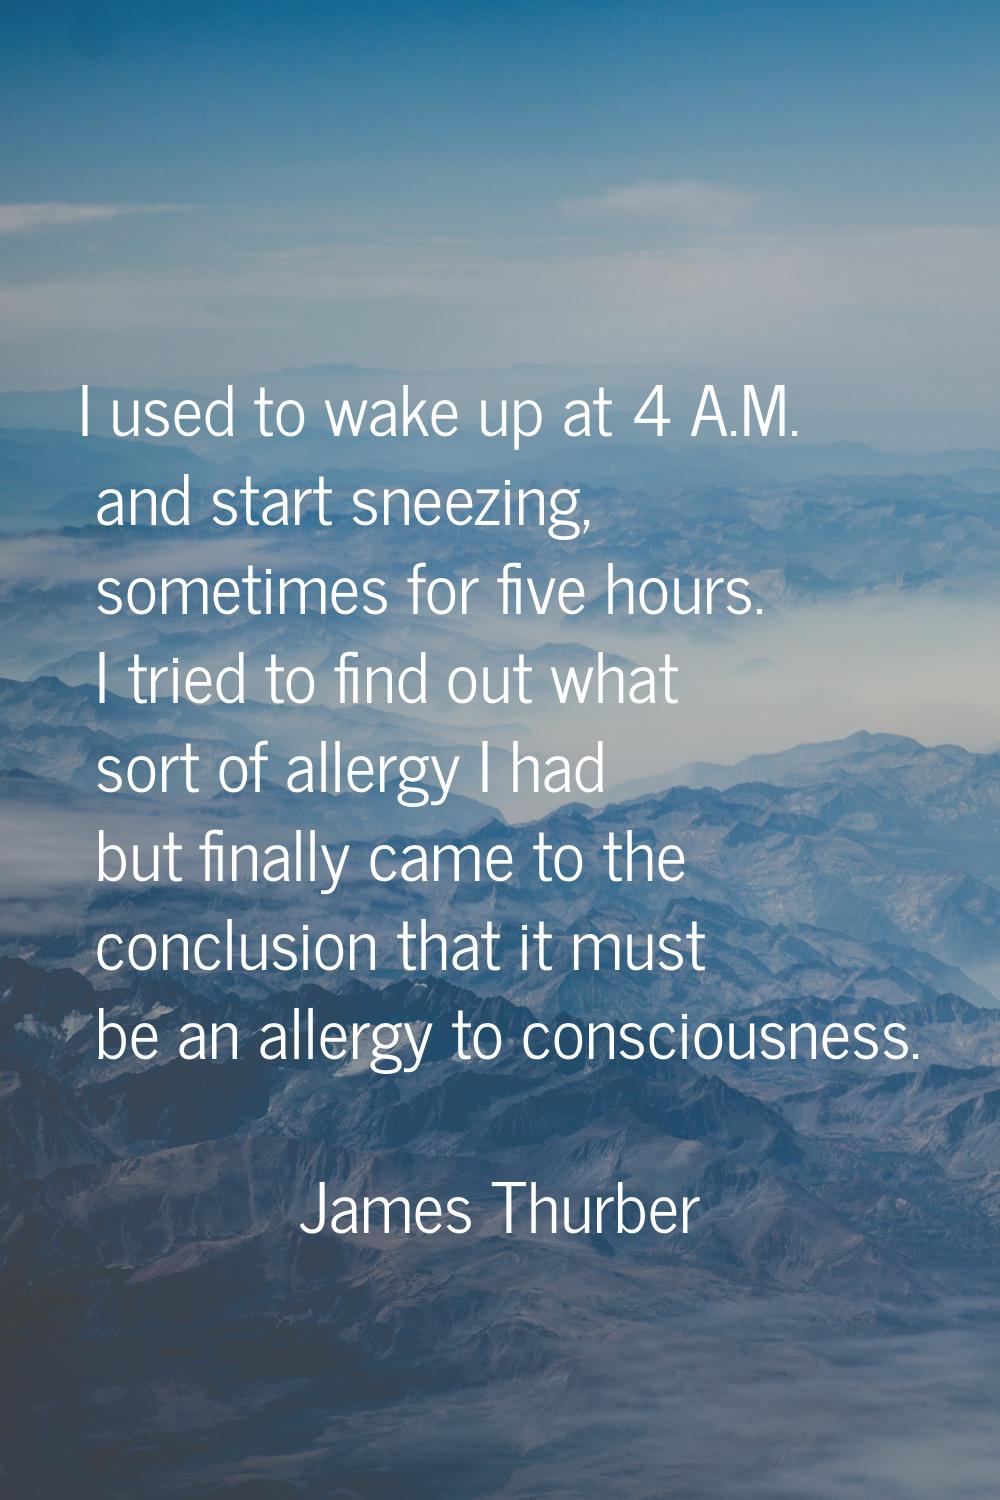 I used to wake up at 4 A.M. and start sneezing, sometimes for five hours. I tried to find out what 